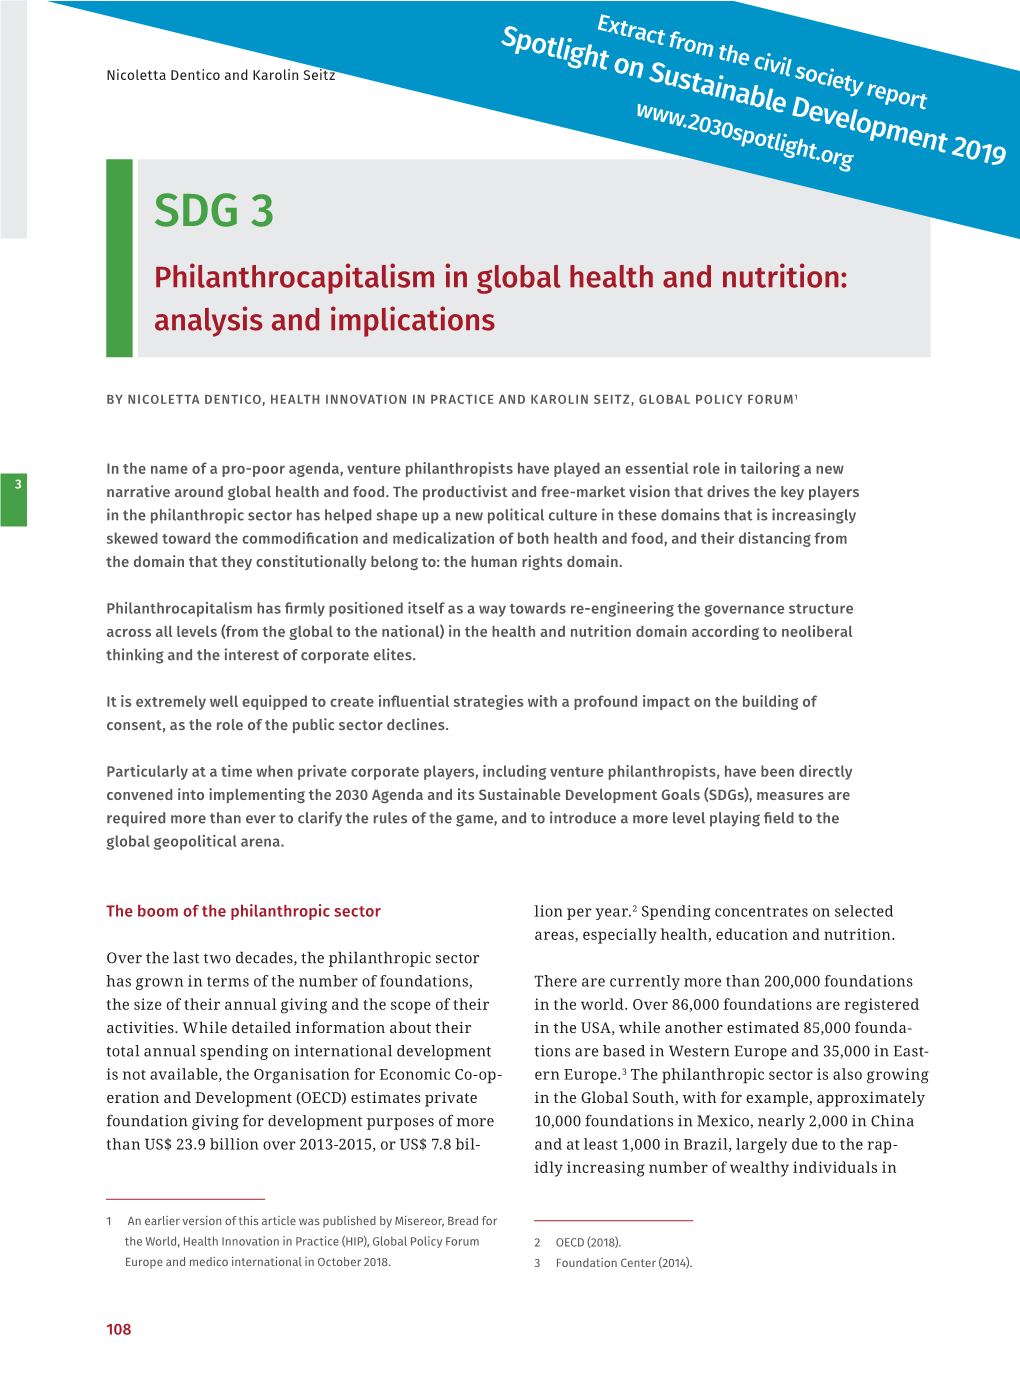 Philanthrocapitalism in Global Health and Nutrition: Analysis and Implications